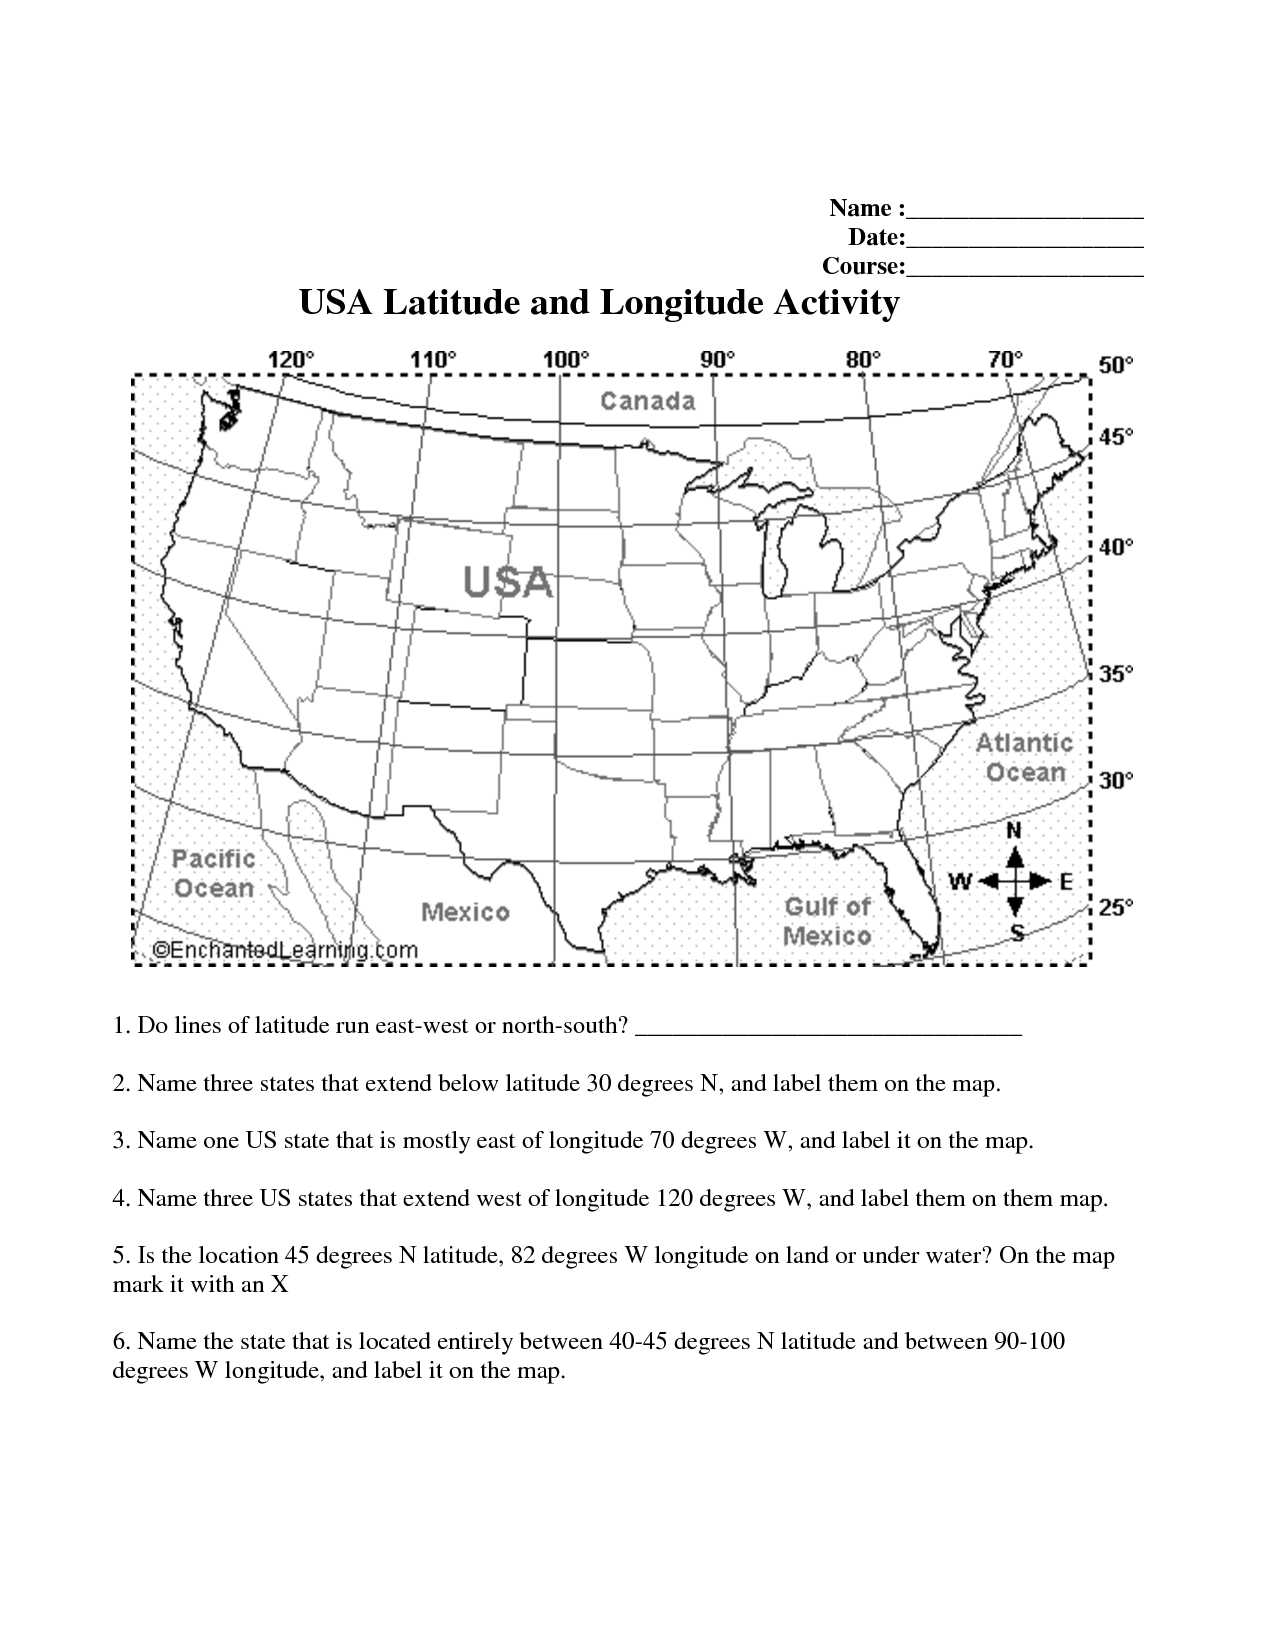 Europe after World War 1 Map Worksheet Answers together with Longitude and Latitude Printable Worksheet